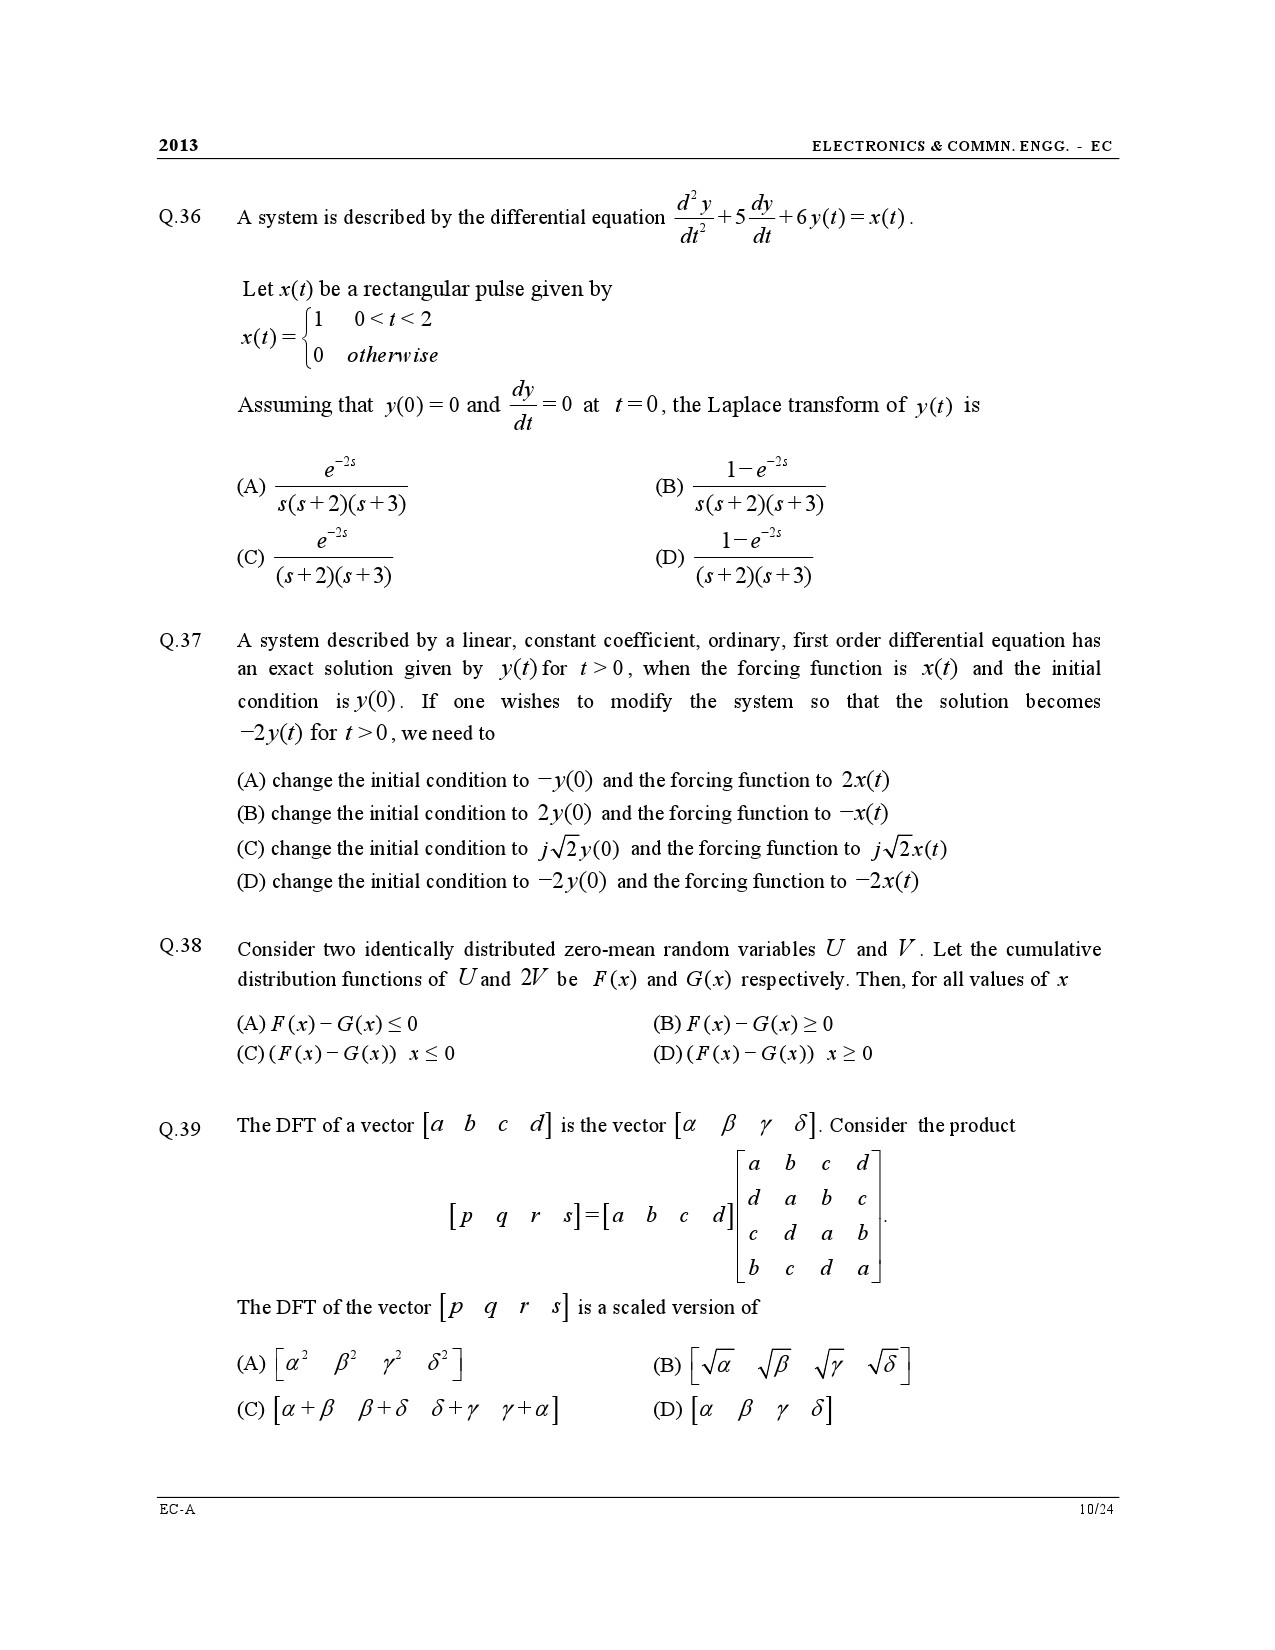 GATE Exam Question Paper 2013 Electronics and Communication Engineering 10